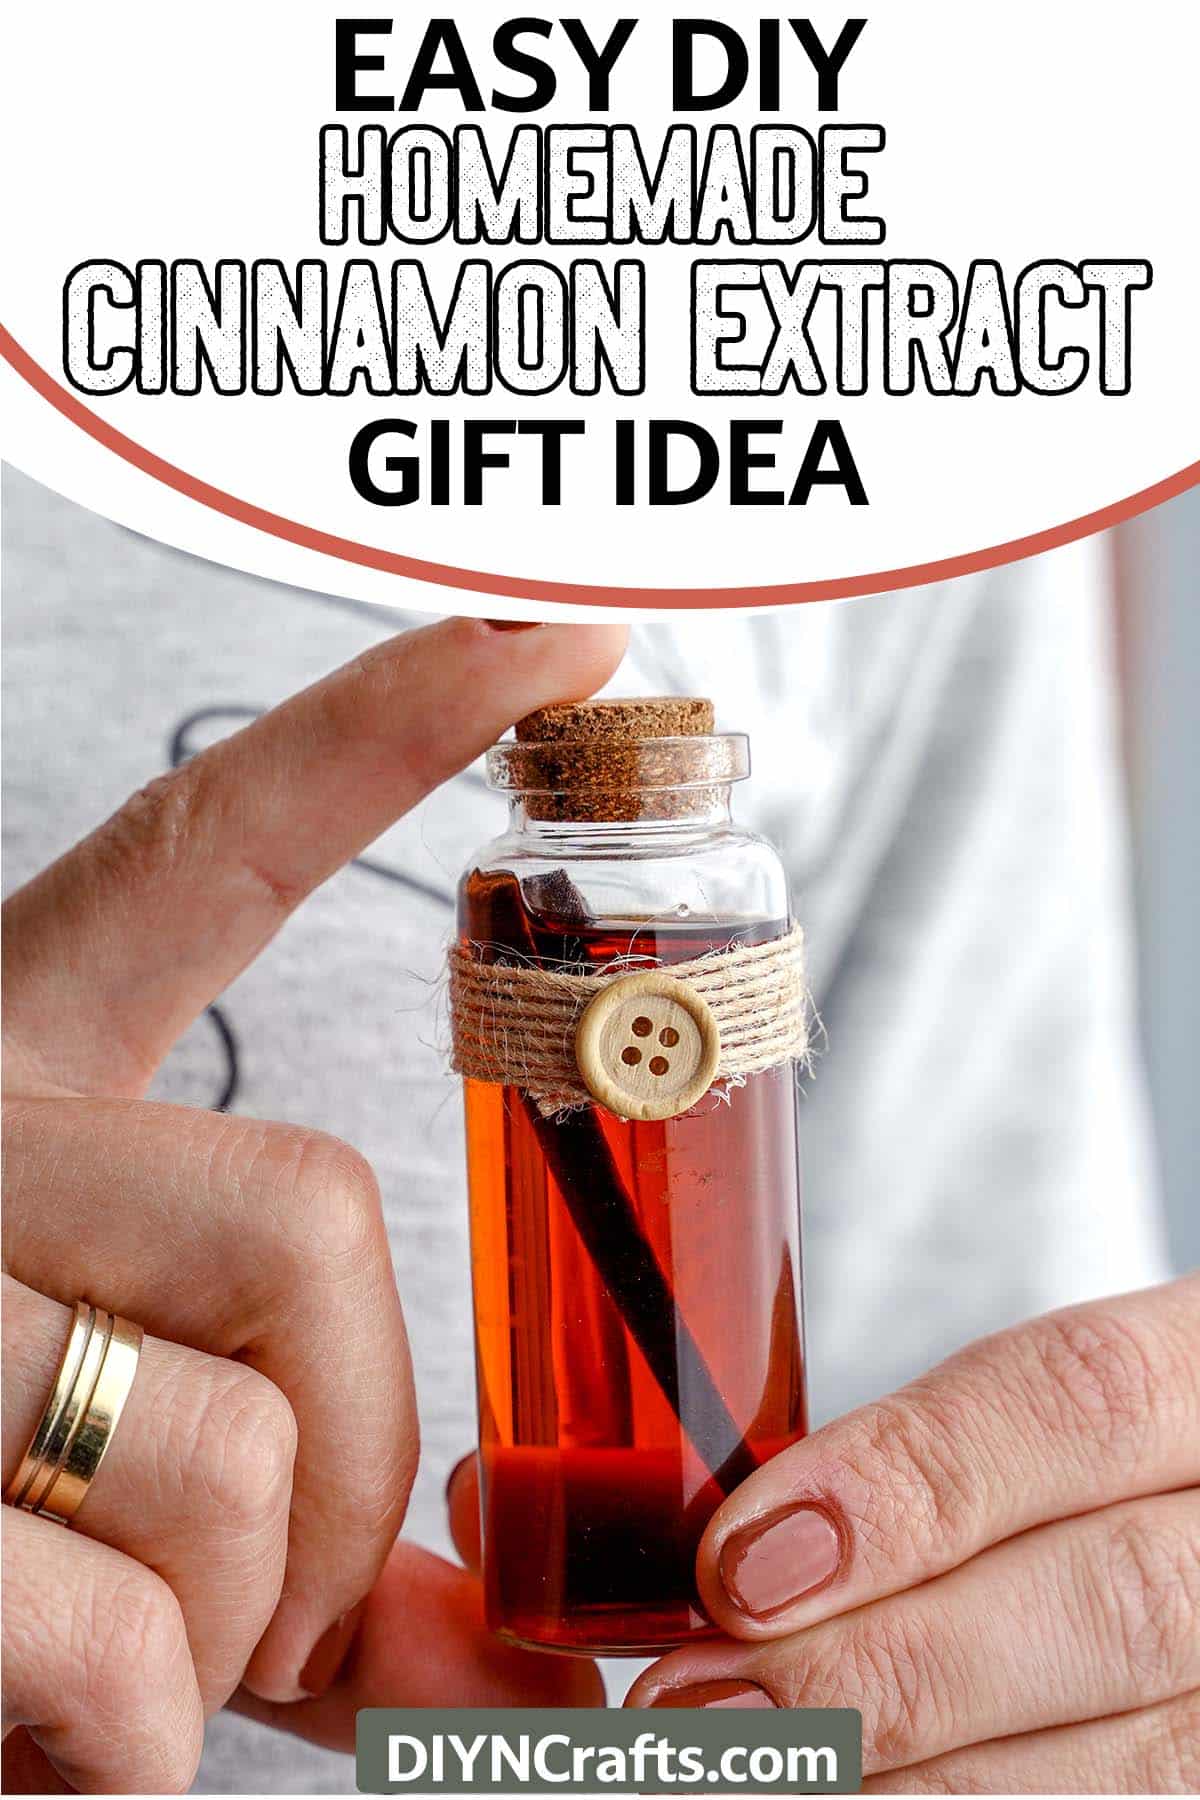 holding a bottle of homemade cinnamon extract gift idea with text which reads easy diy homemade cinnamon extract gift idea